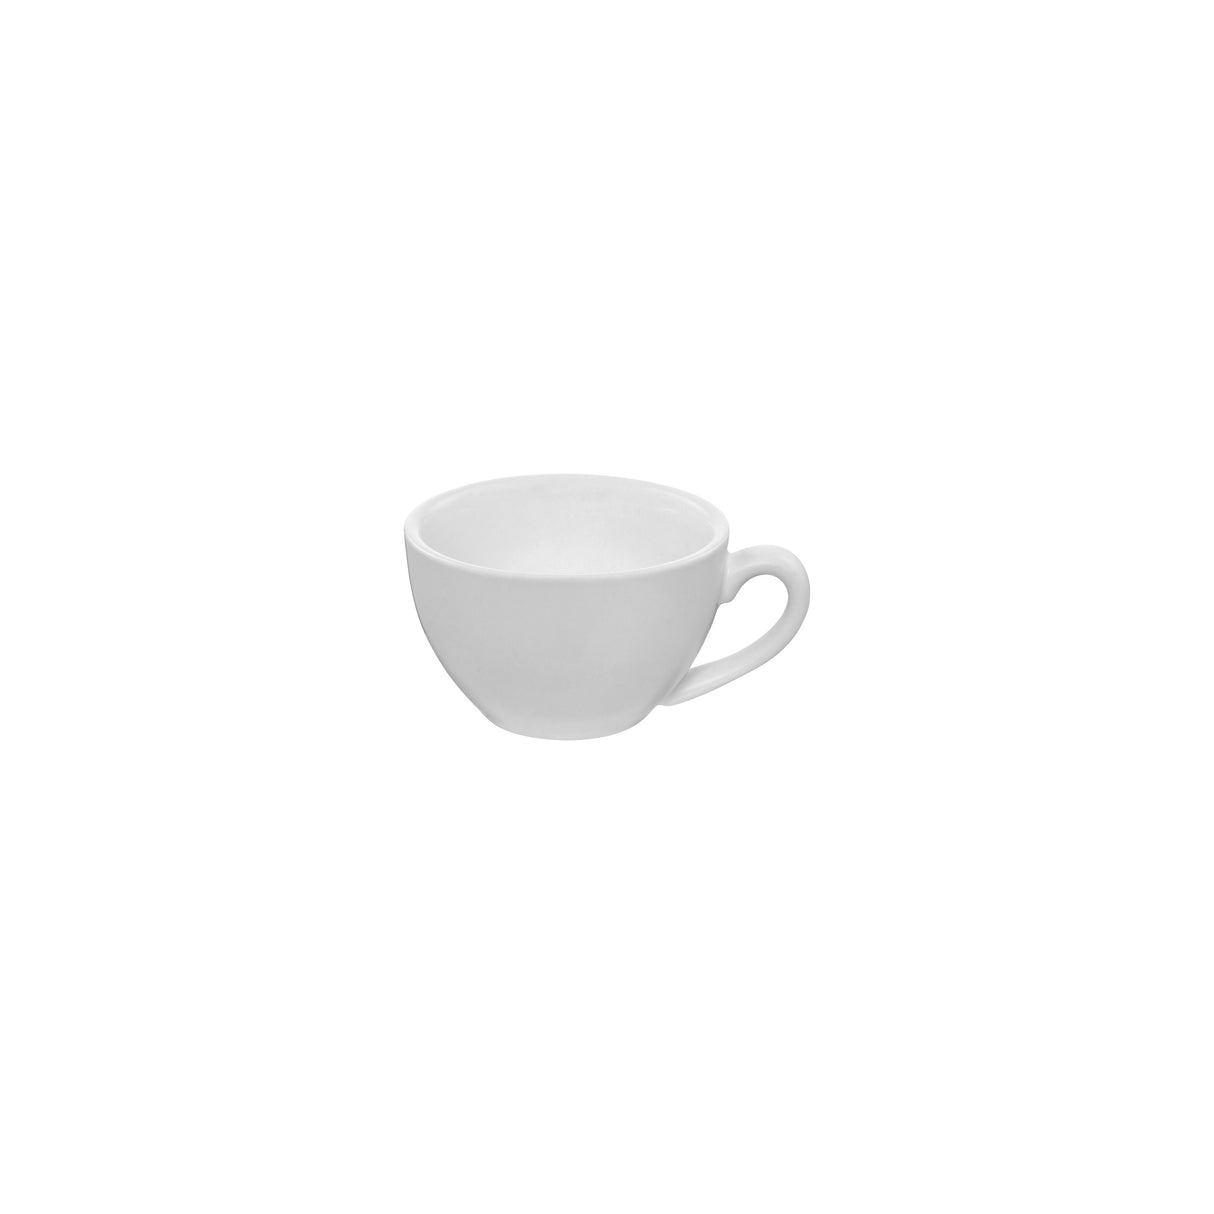 Cappuccino Cup - Bianco, 200ml, Intorno: Pack of 6